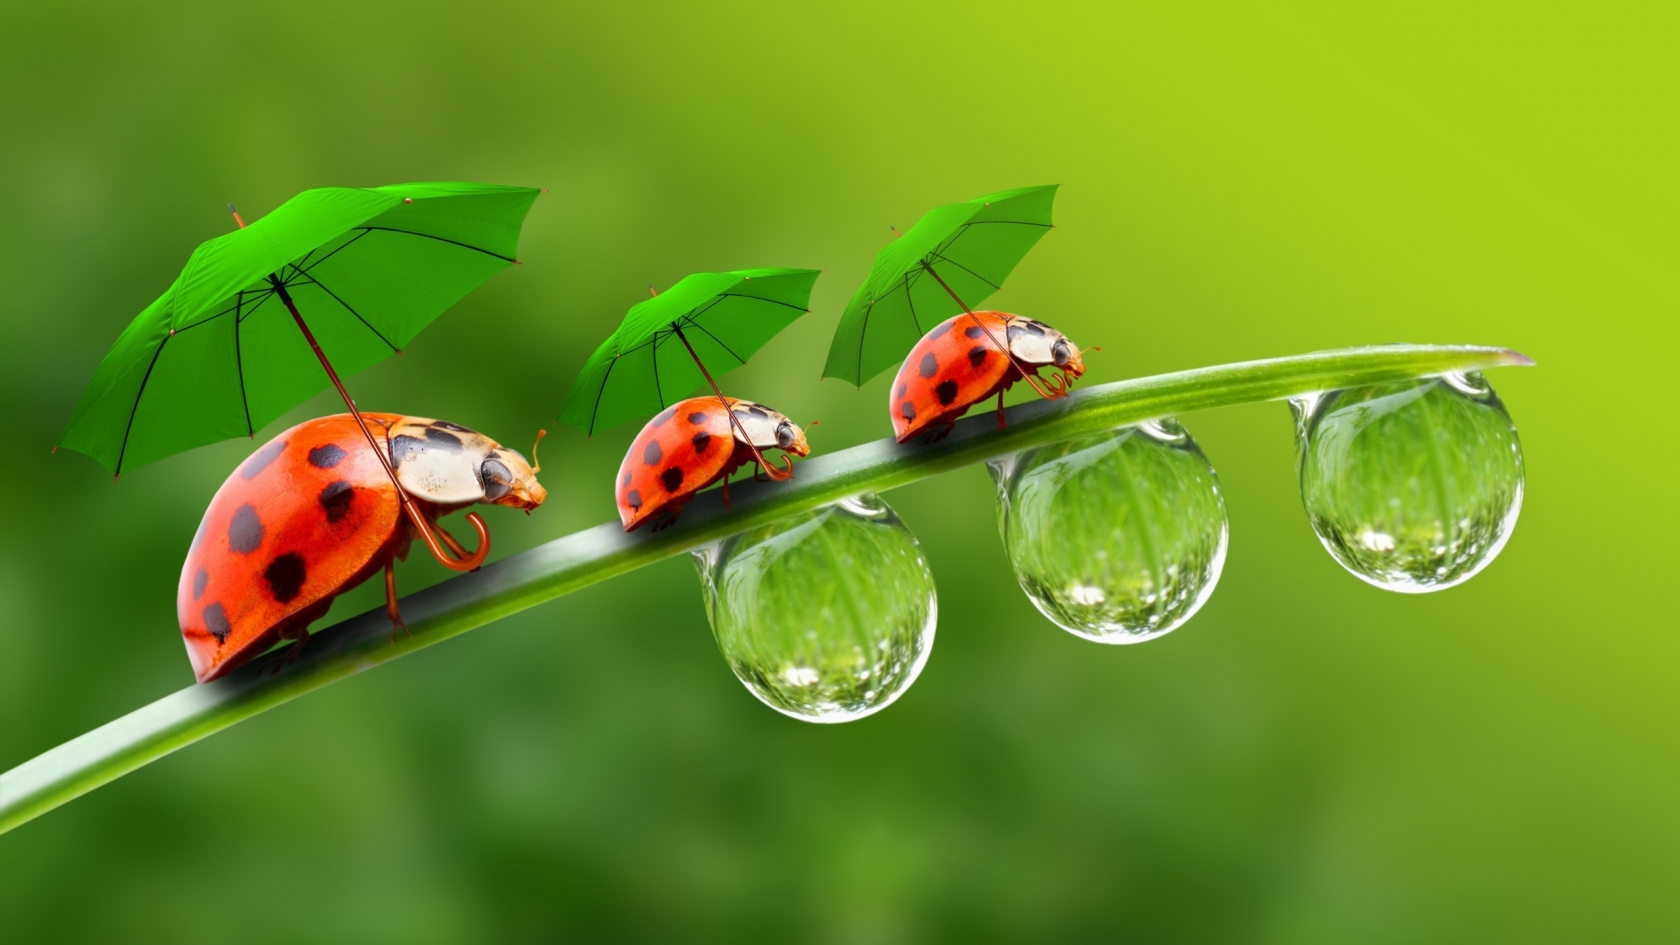 Ladybugs with Umbrellas for 1680 x 945 HDTV resolution